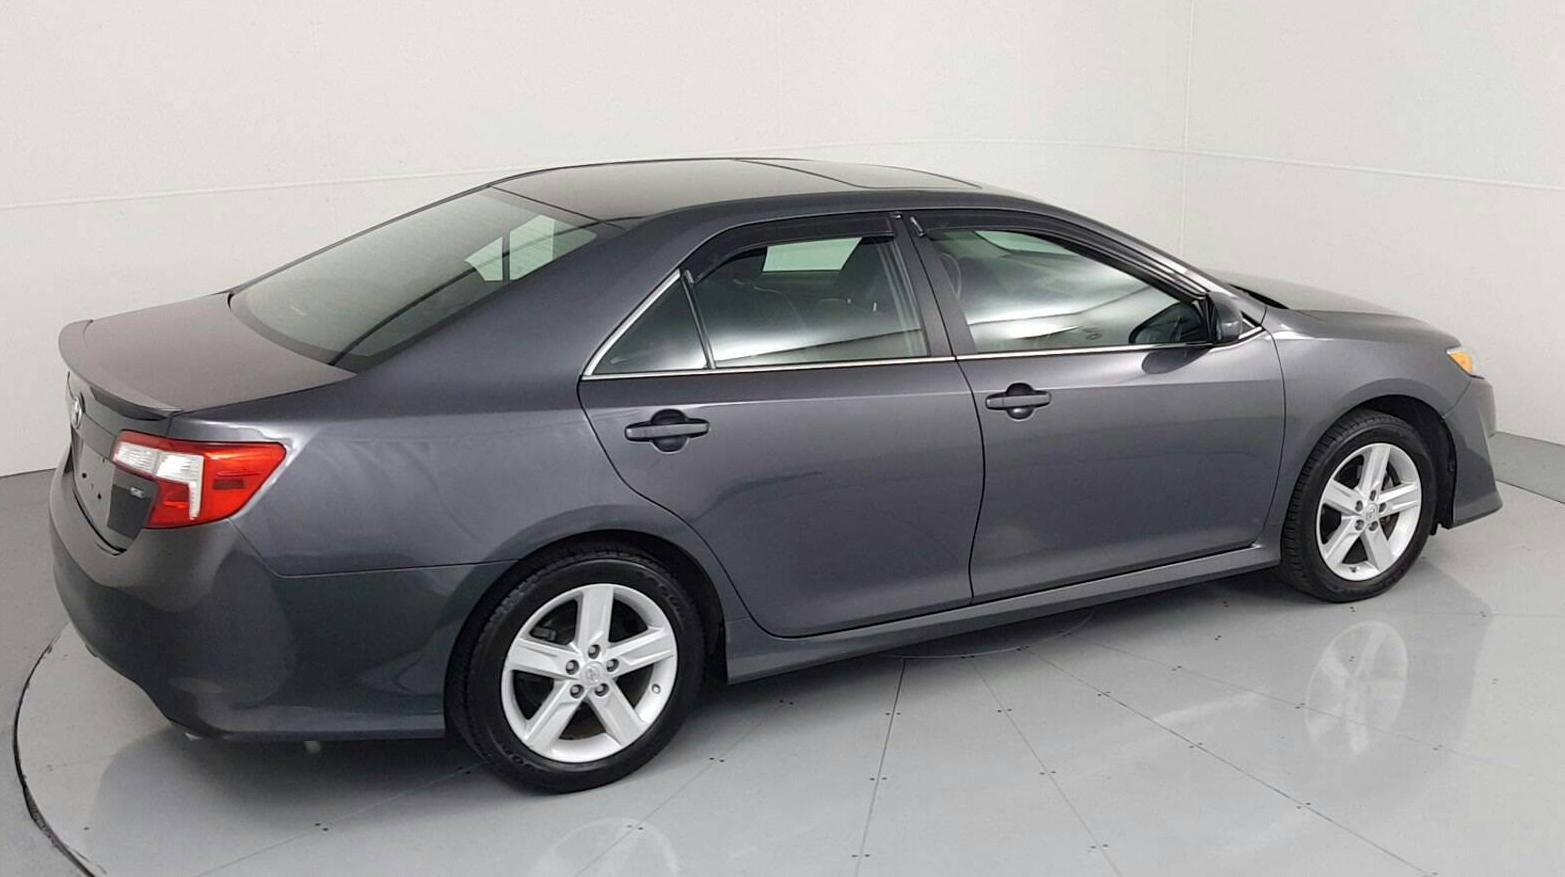 Pre-Owned 2012 TOYOTA Camry SE 4-door Mid-Size Passenger Car in ...